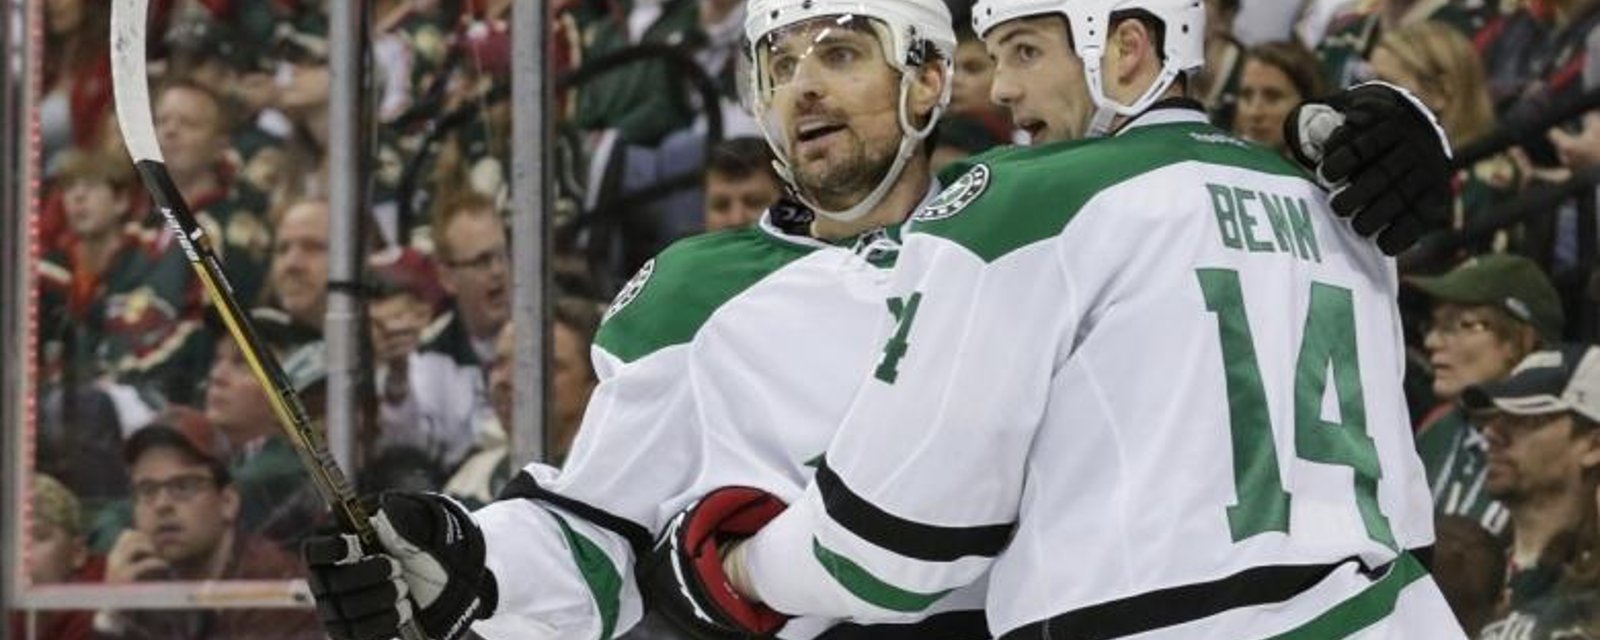 Breaking: Dallas Stars may trade one of their top forwards for help on defense!